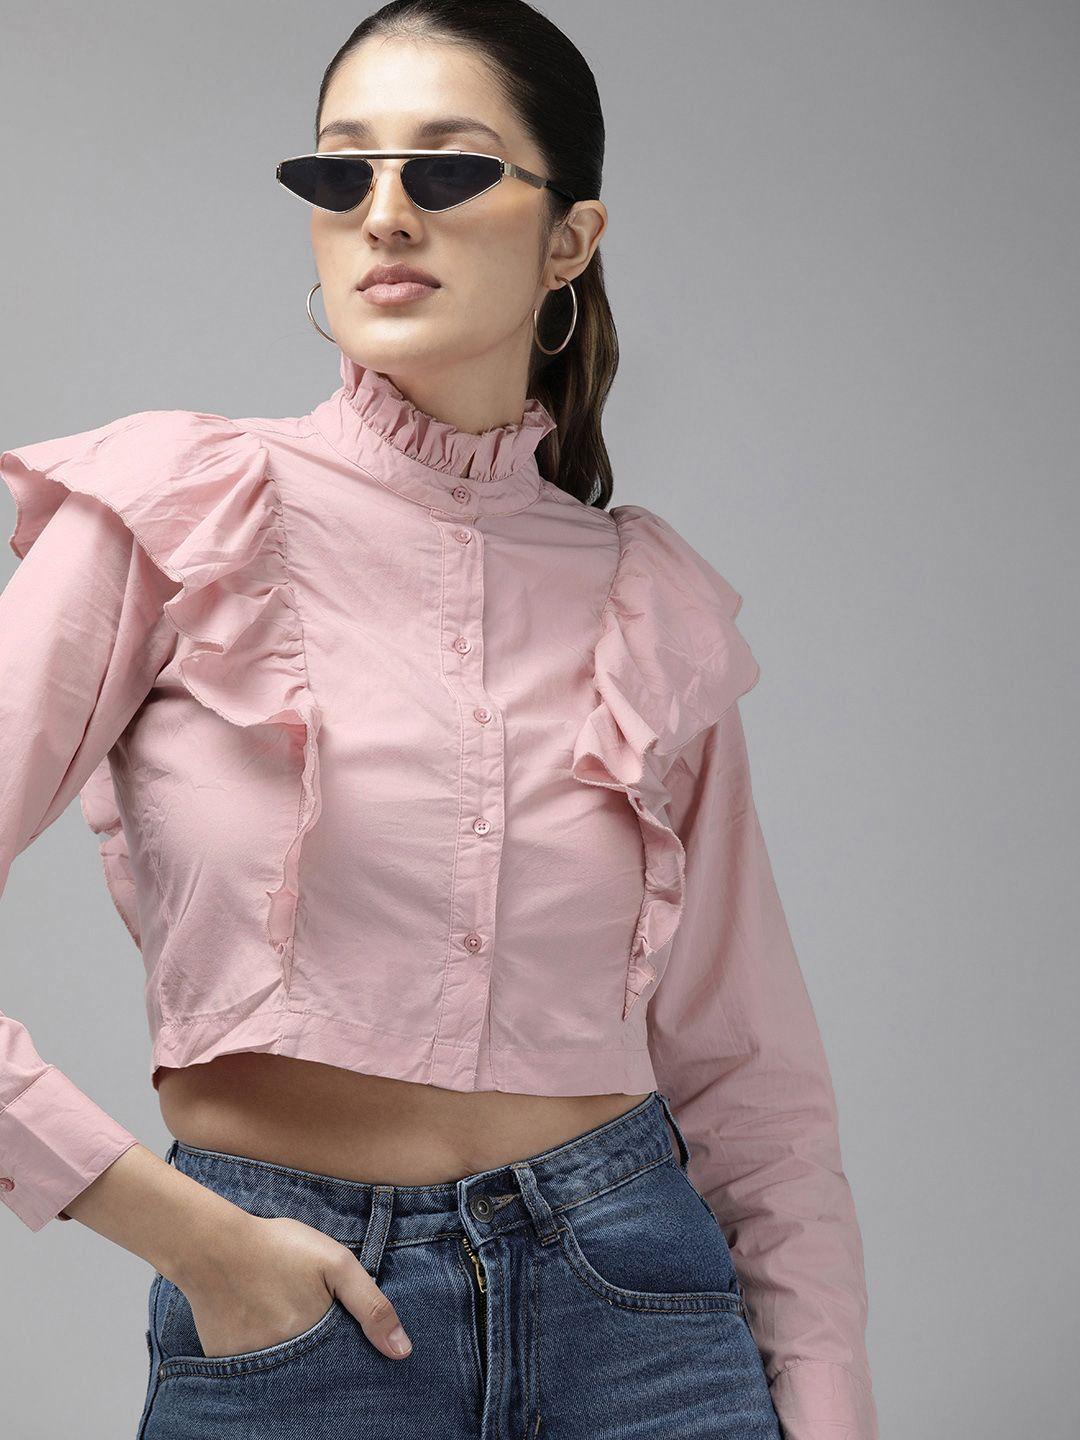 the roadster life co. slim fit ruffles pure cotton casual crop shirt